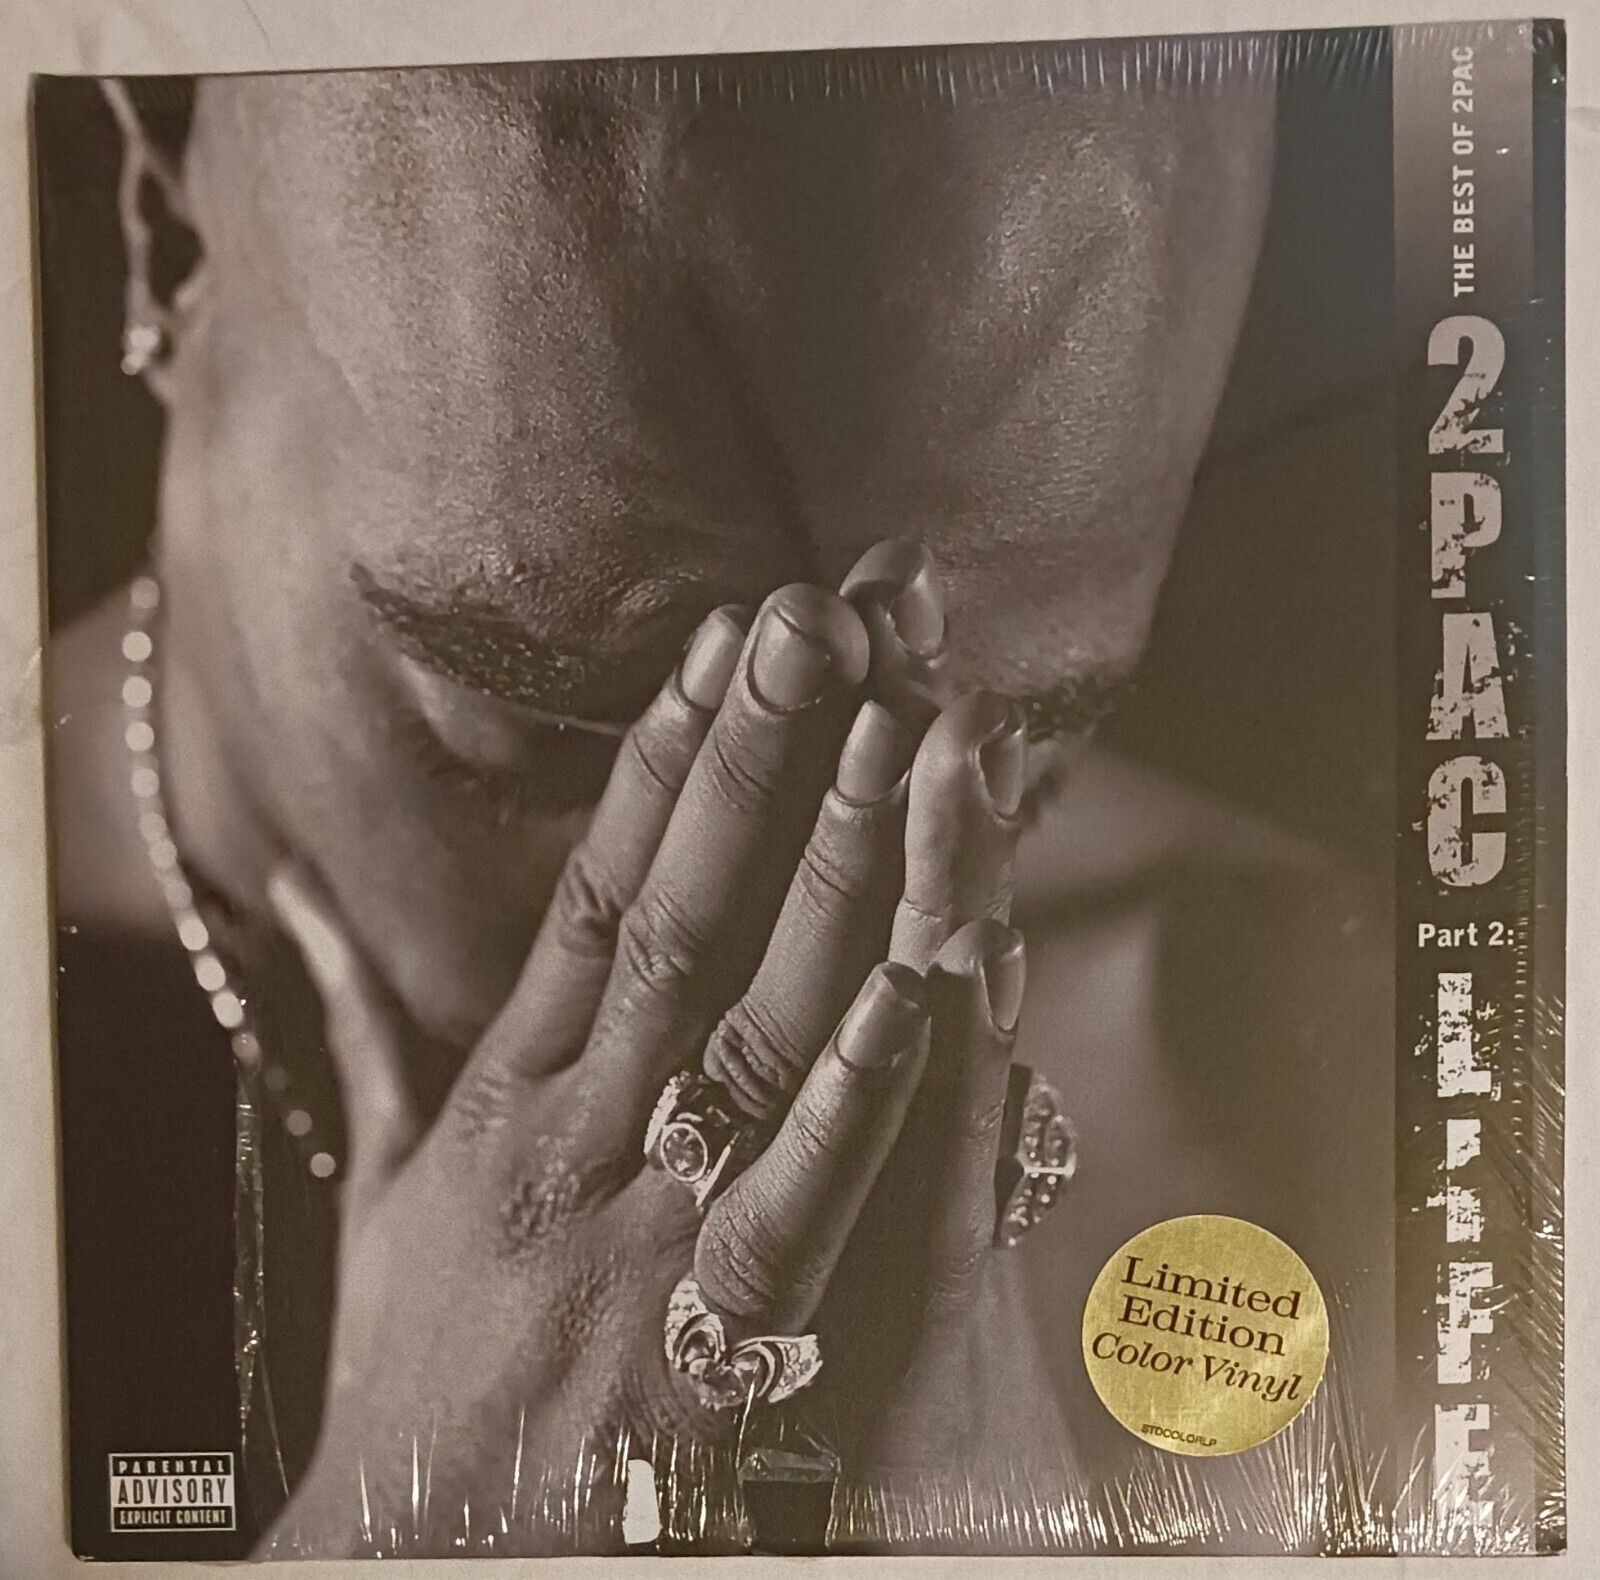 The Best Of 2Pac - Part 2: Life by 2Pac Limited Edition Color Vinyl Sealed